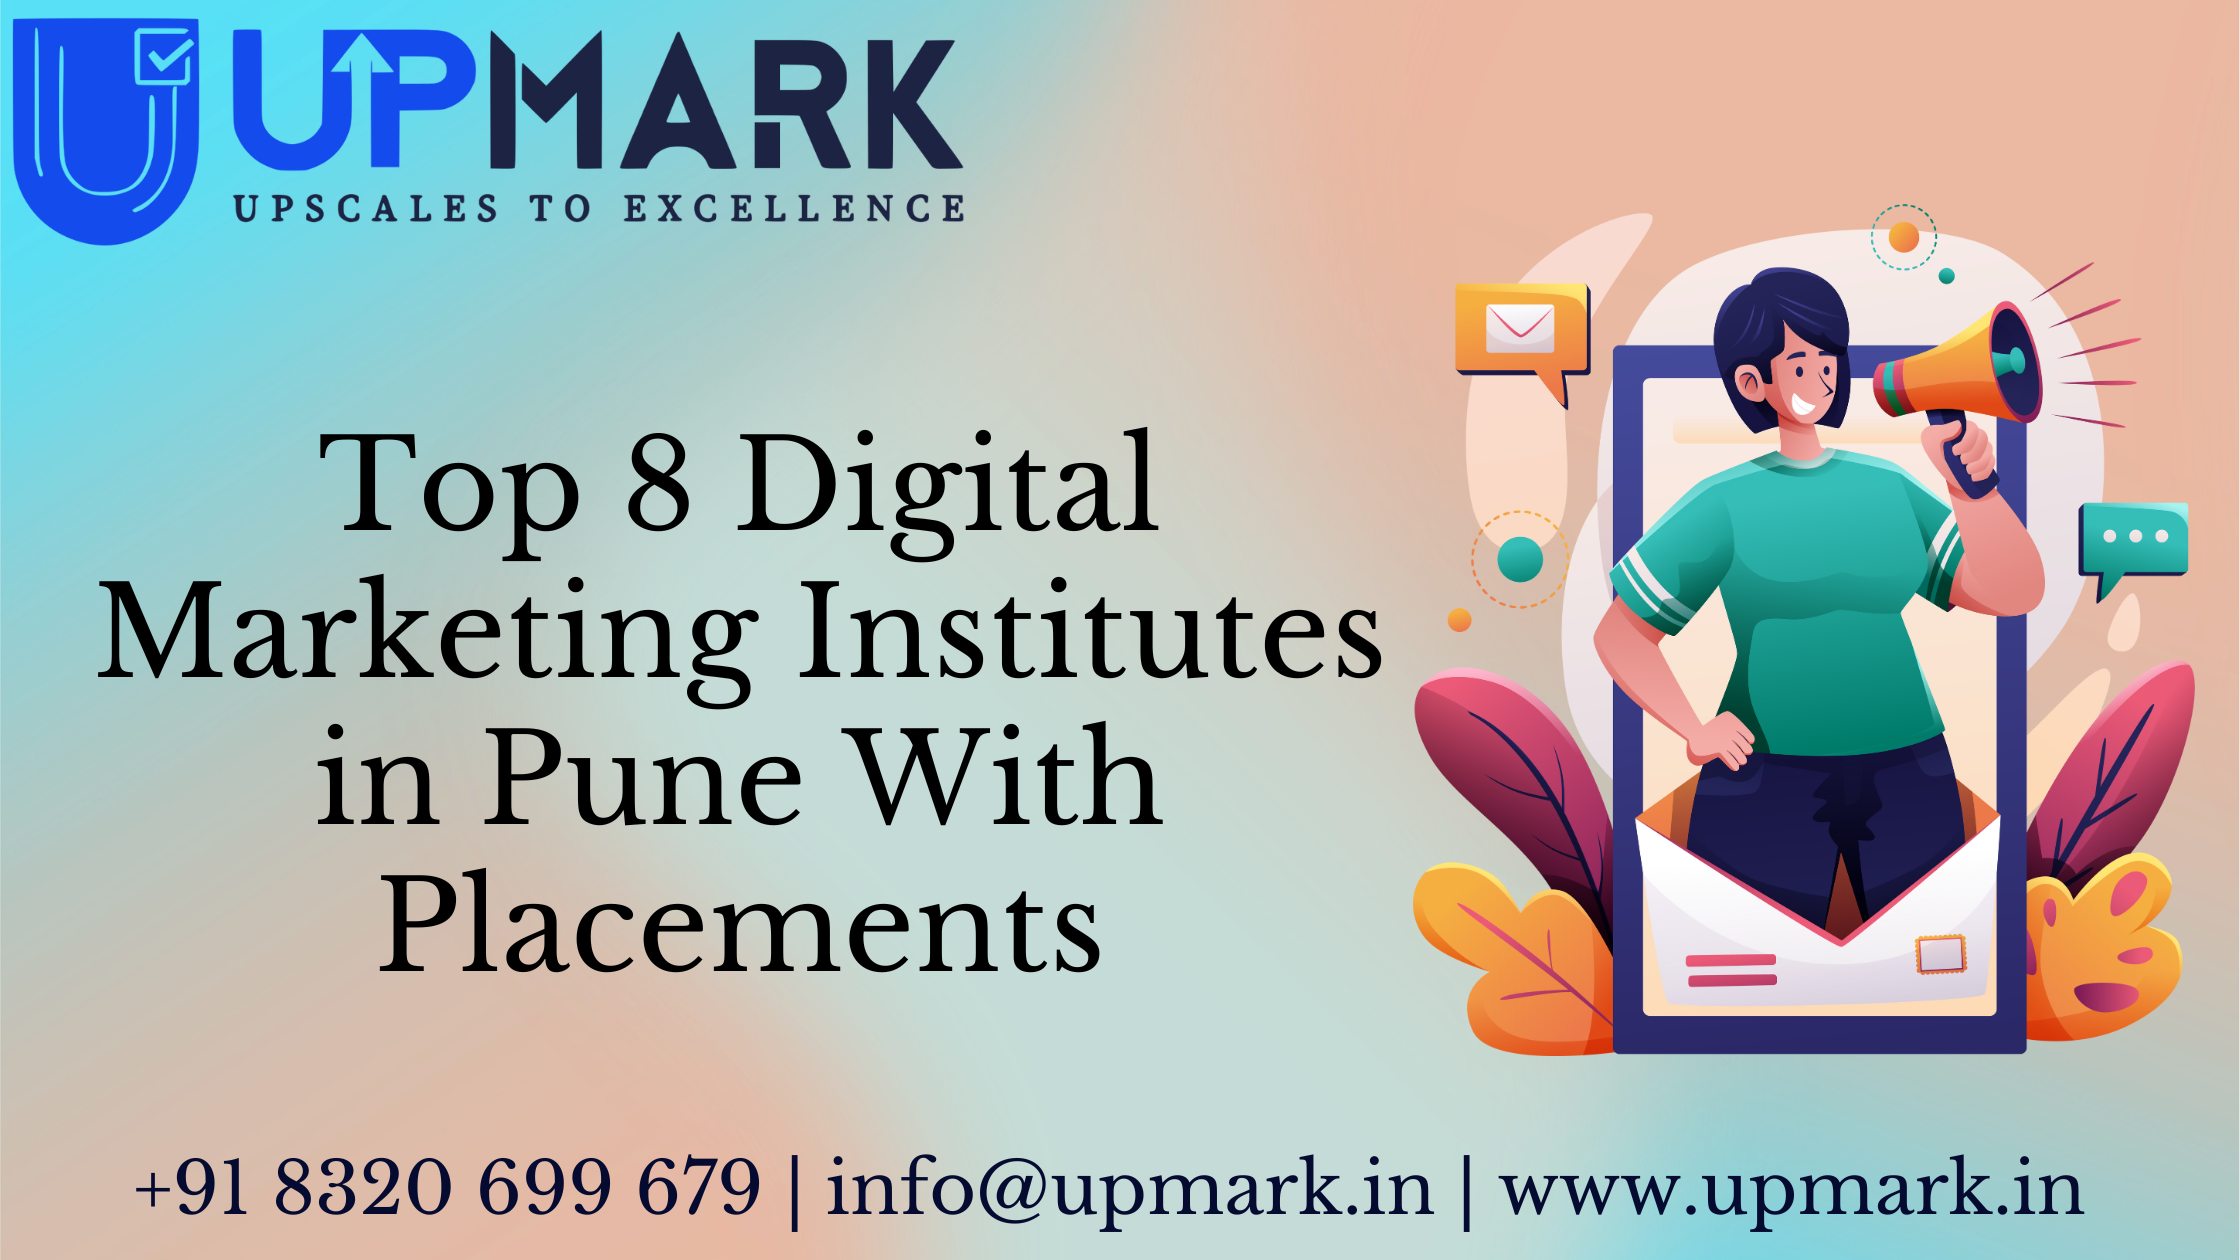 Top 8 Digital Marketing Institutes in Pune With Placements